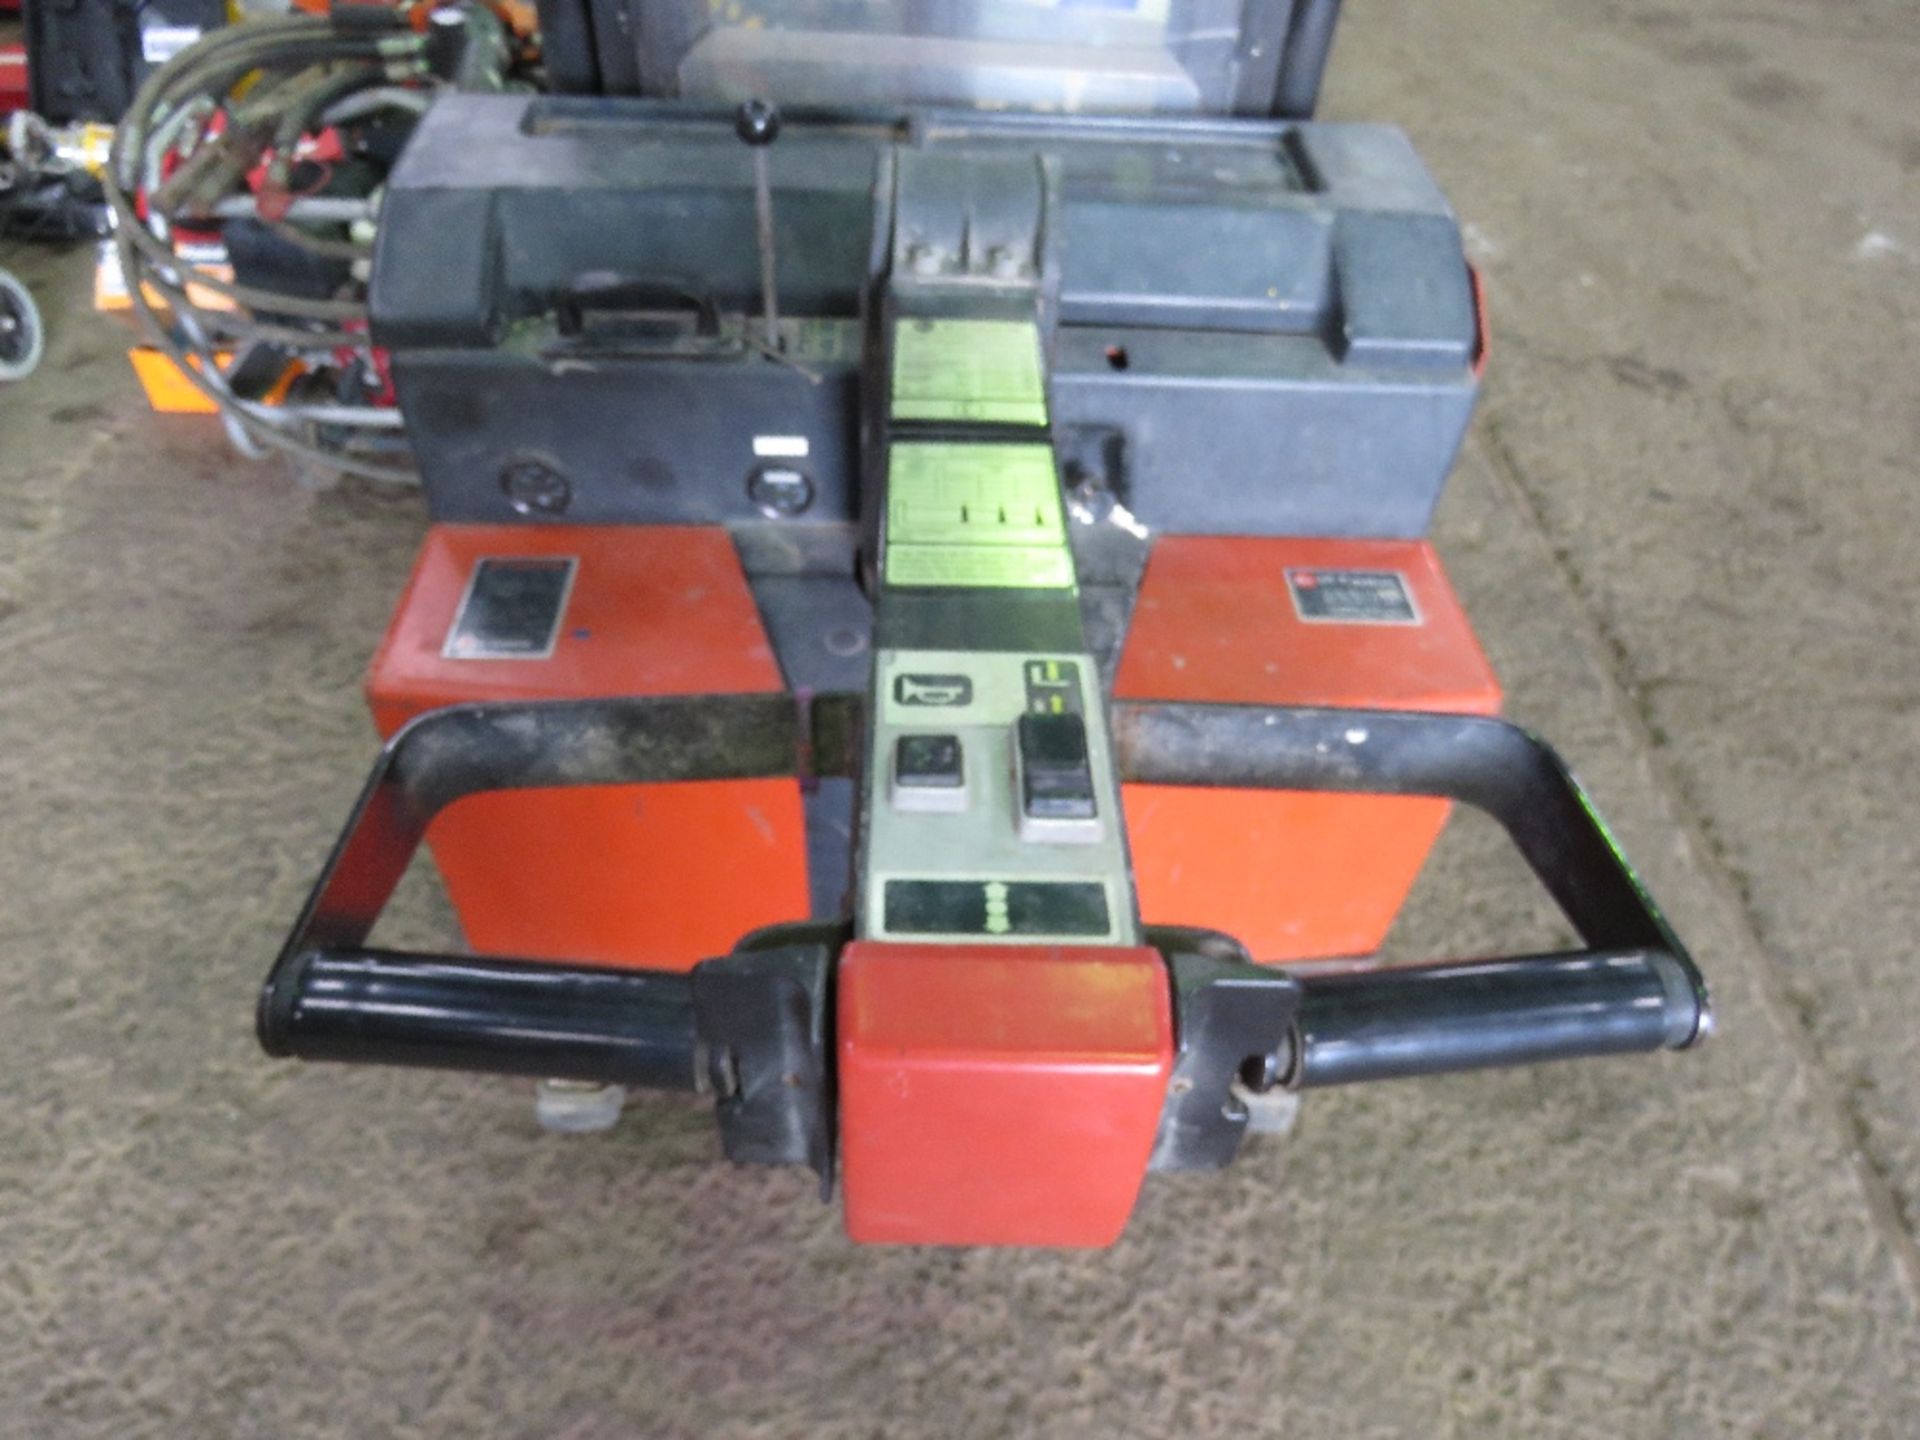 BT ROLATRUC BATTERY POWERED PALLET TRUCK/FORKLIFT WITH A CHARGER. WHEN TESTED WAS SEEN TO DRIVE AND - Image 4 of 11